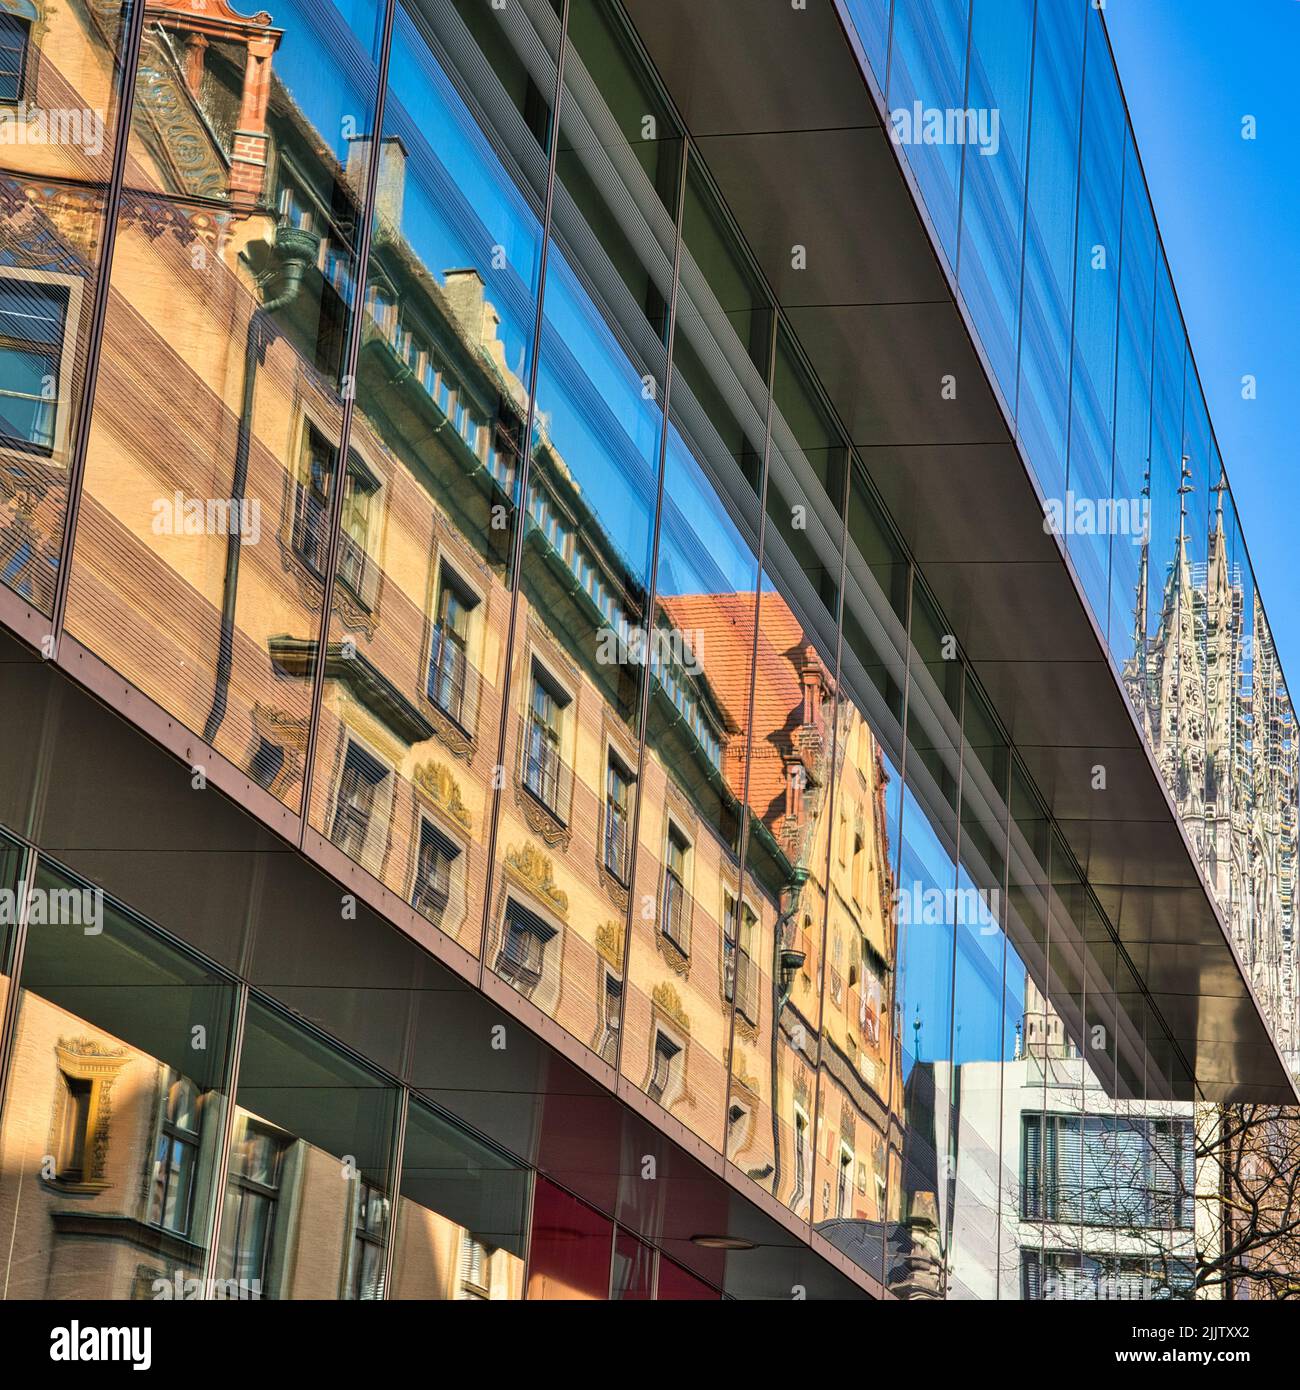 A vertical shot of an urban area with a modern building in Ulm City, Munster, Germany Stock Photo